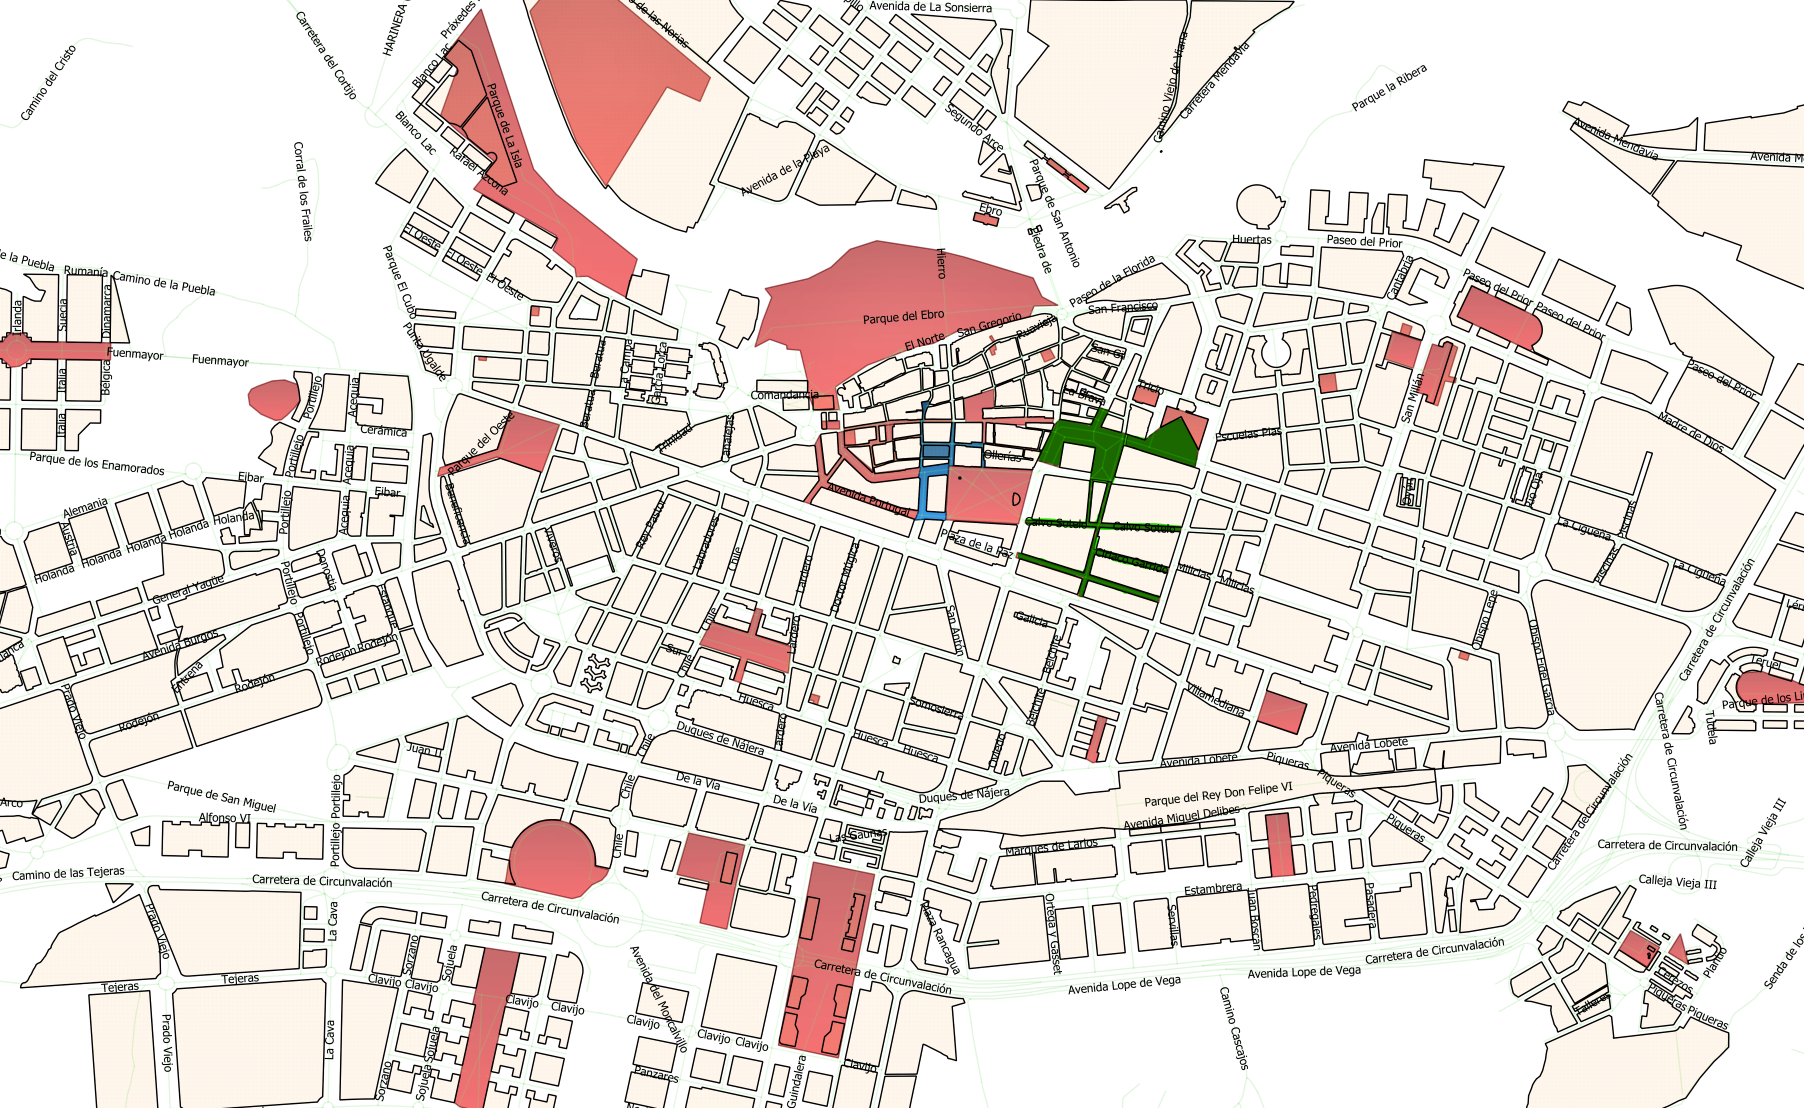 Extension and improvement of Logroño's free municipal wifi network coverage